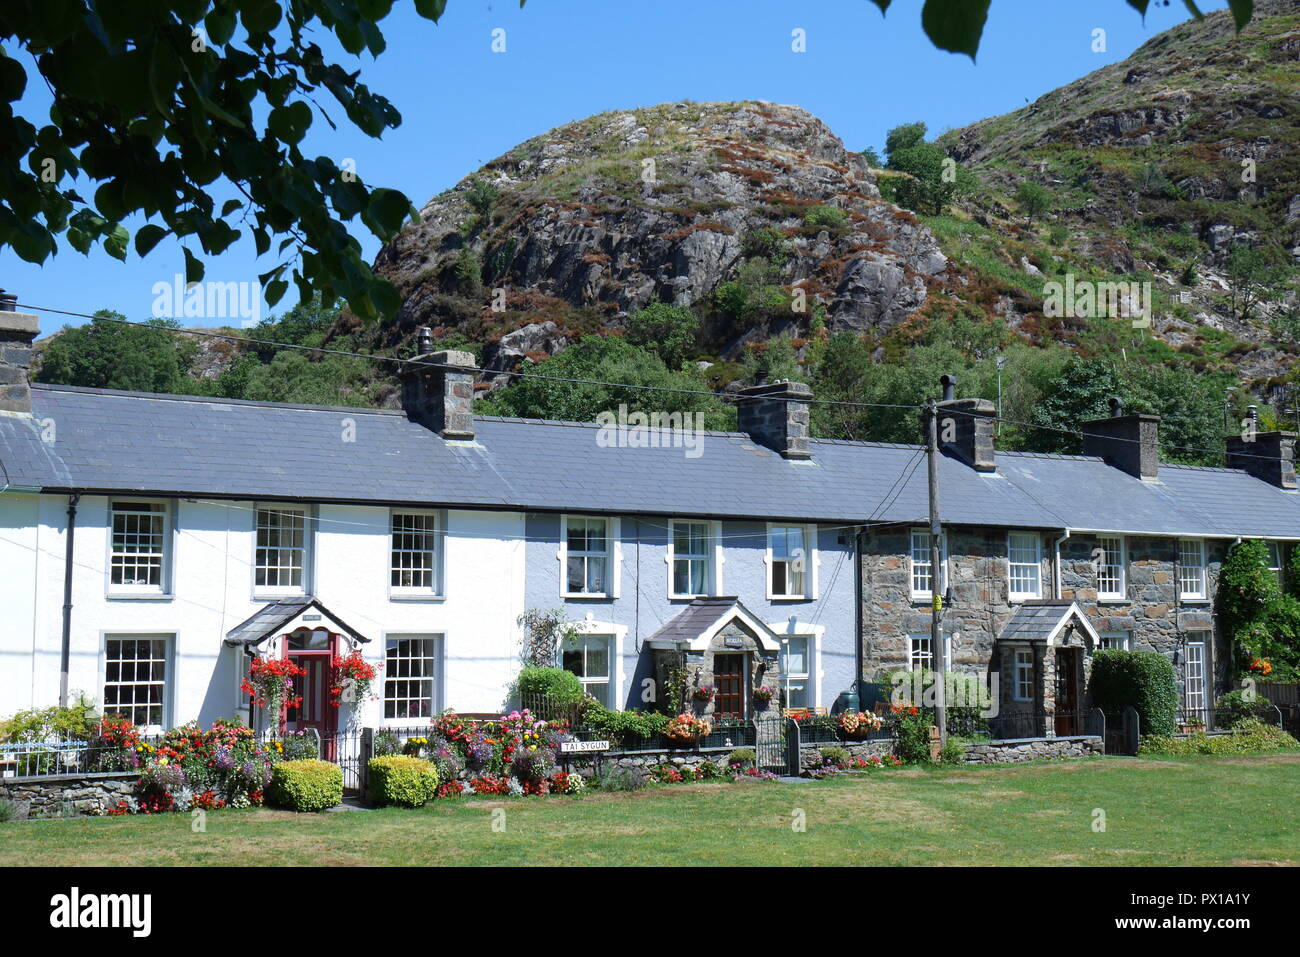 Row of terraced cottages, looking onto the village green, Beddgelert, Gwynedd, Snowdonia, North Wales, United Kingdom Stock Photo